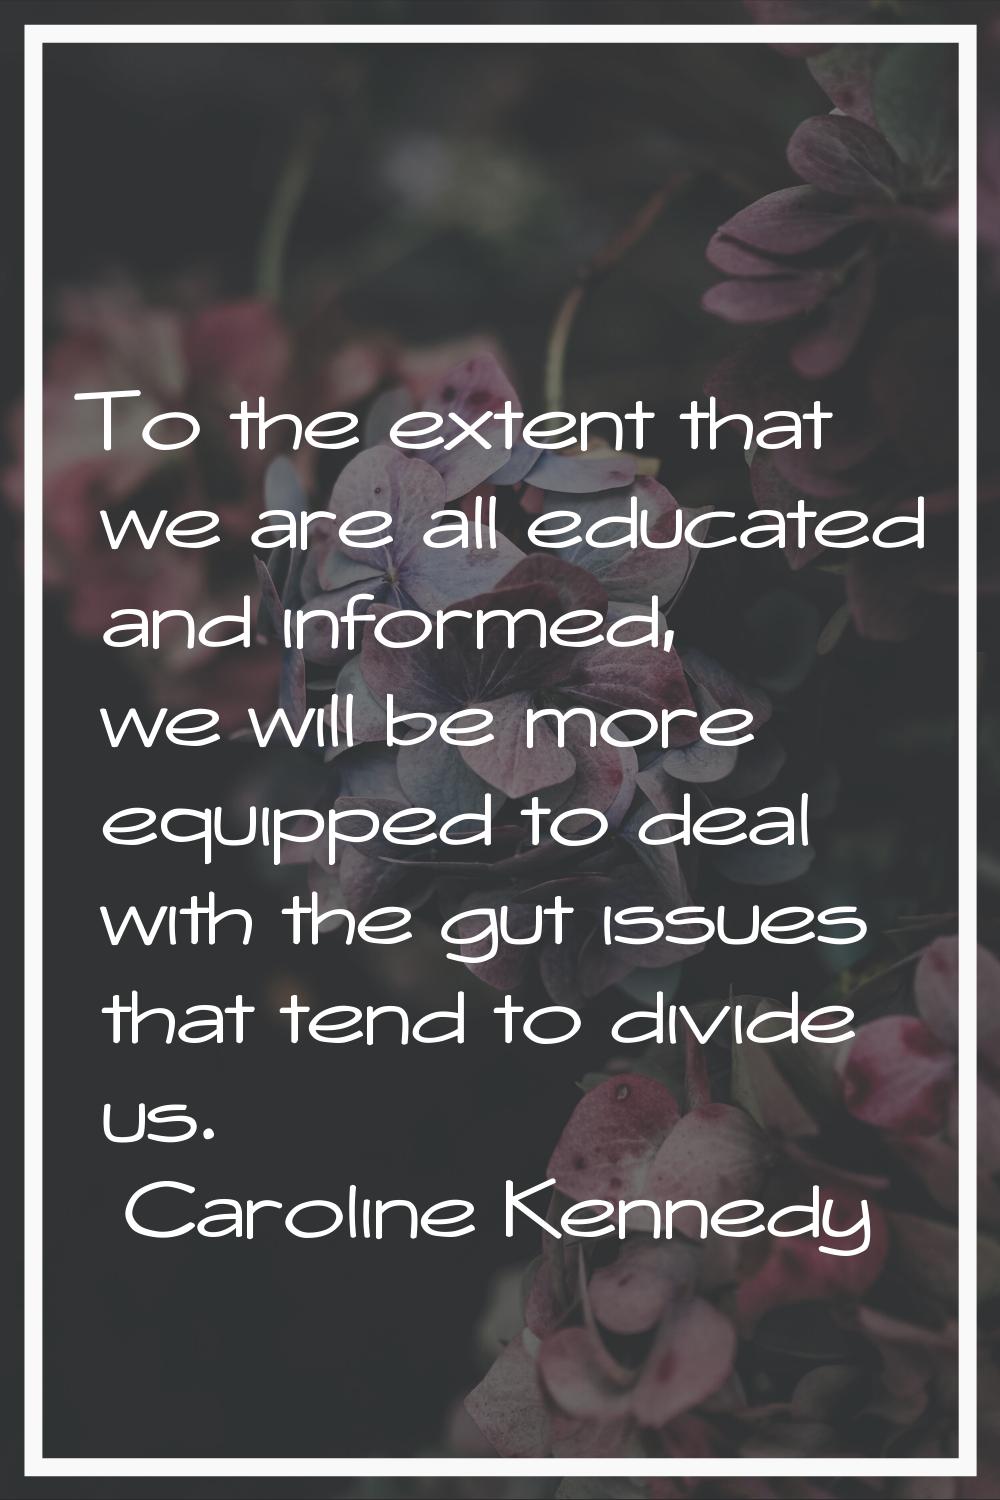 To the extent that we are all educated and informed, we will be more equipped to deal with the gut 